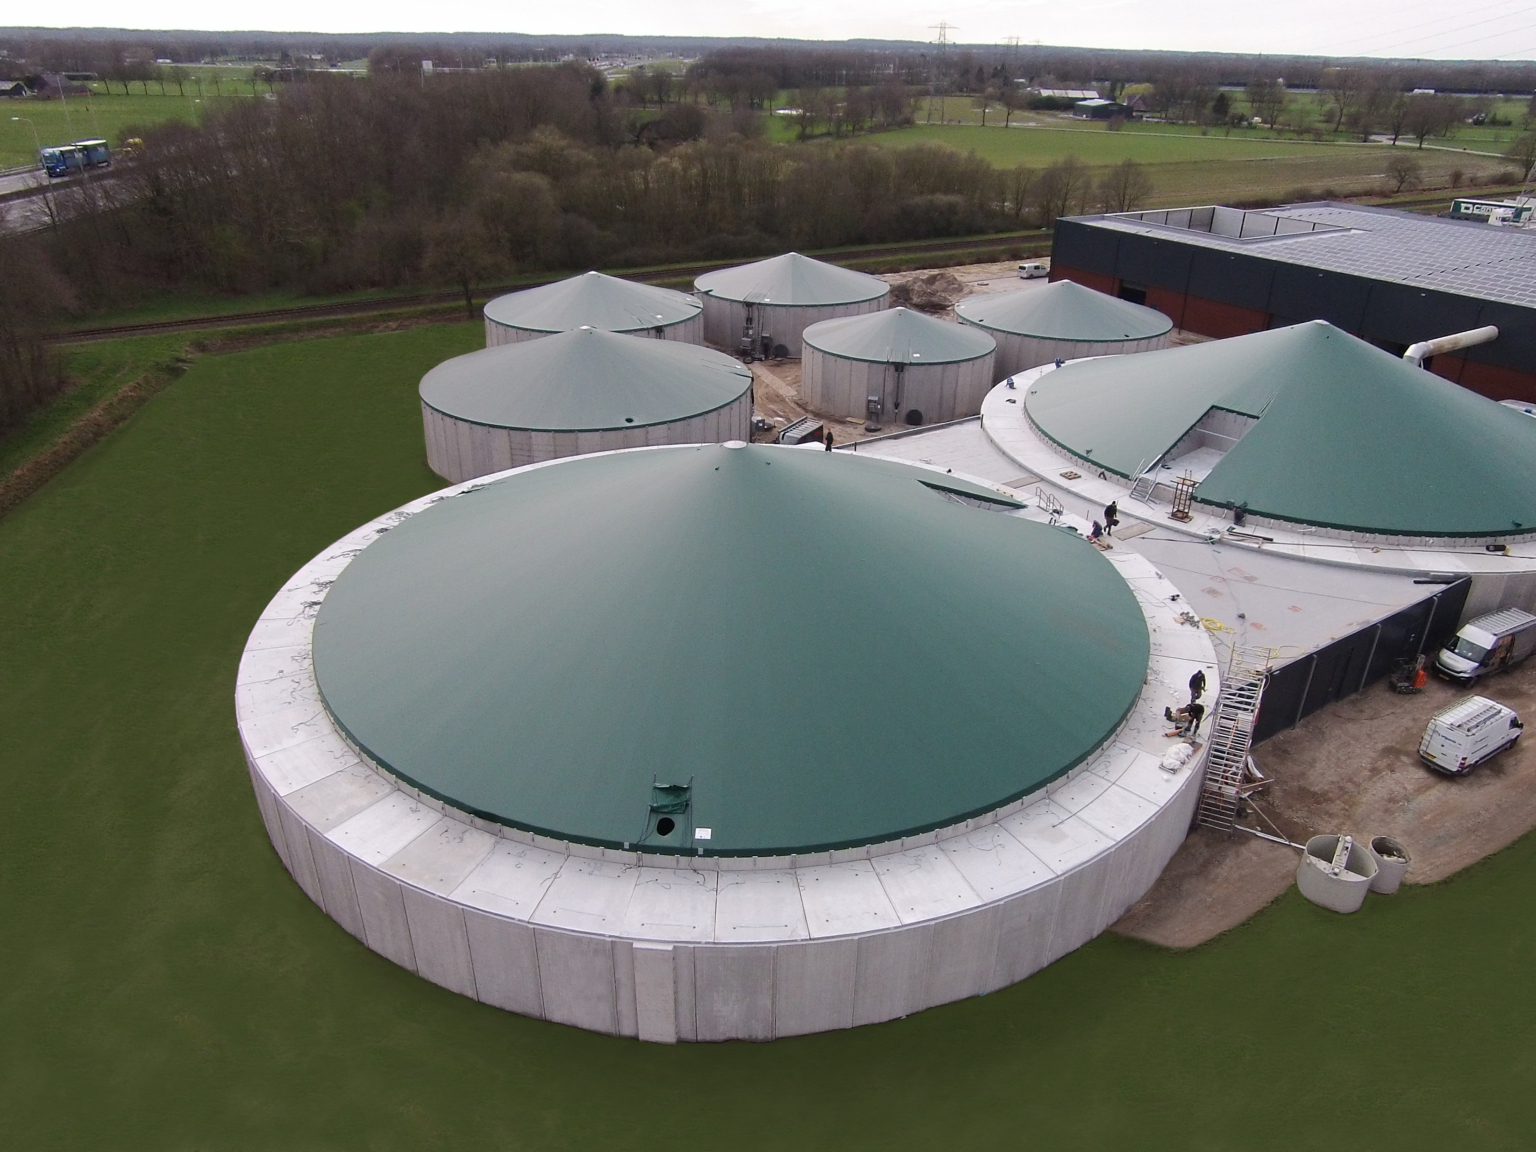 Seven green tensioned covers on concrete silos